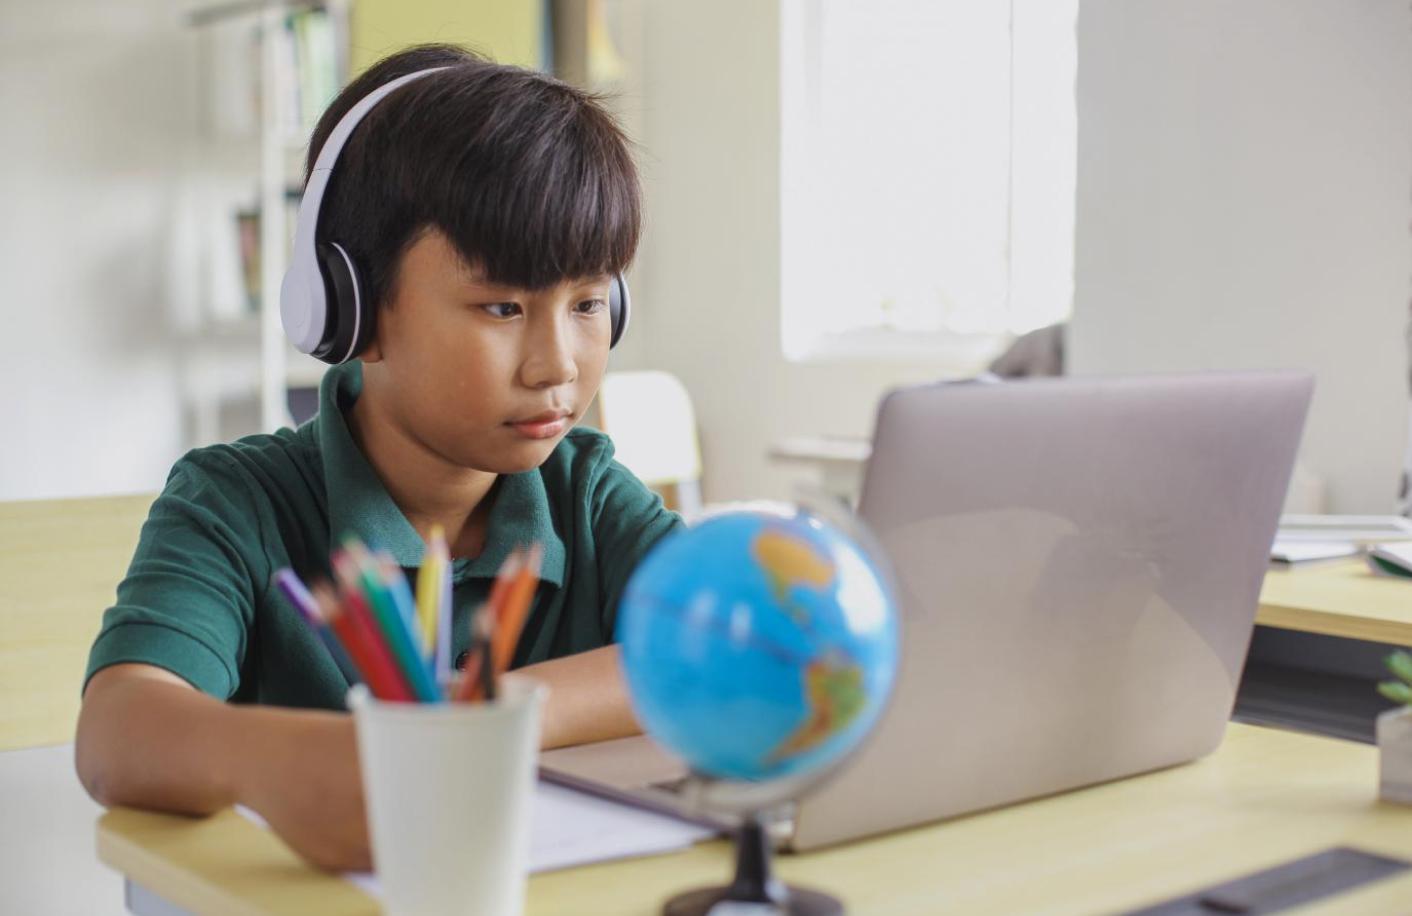 Child wearing dark green polo shirt and headphones, looking at something on a laptop screen open in front of him.